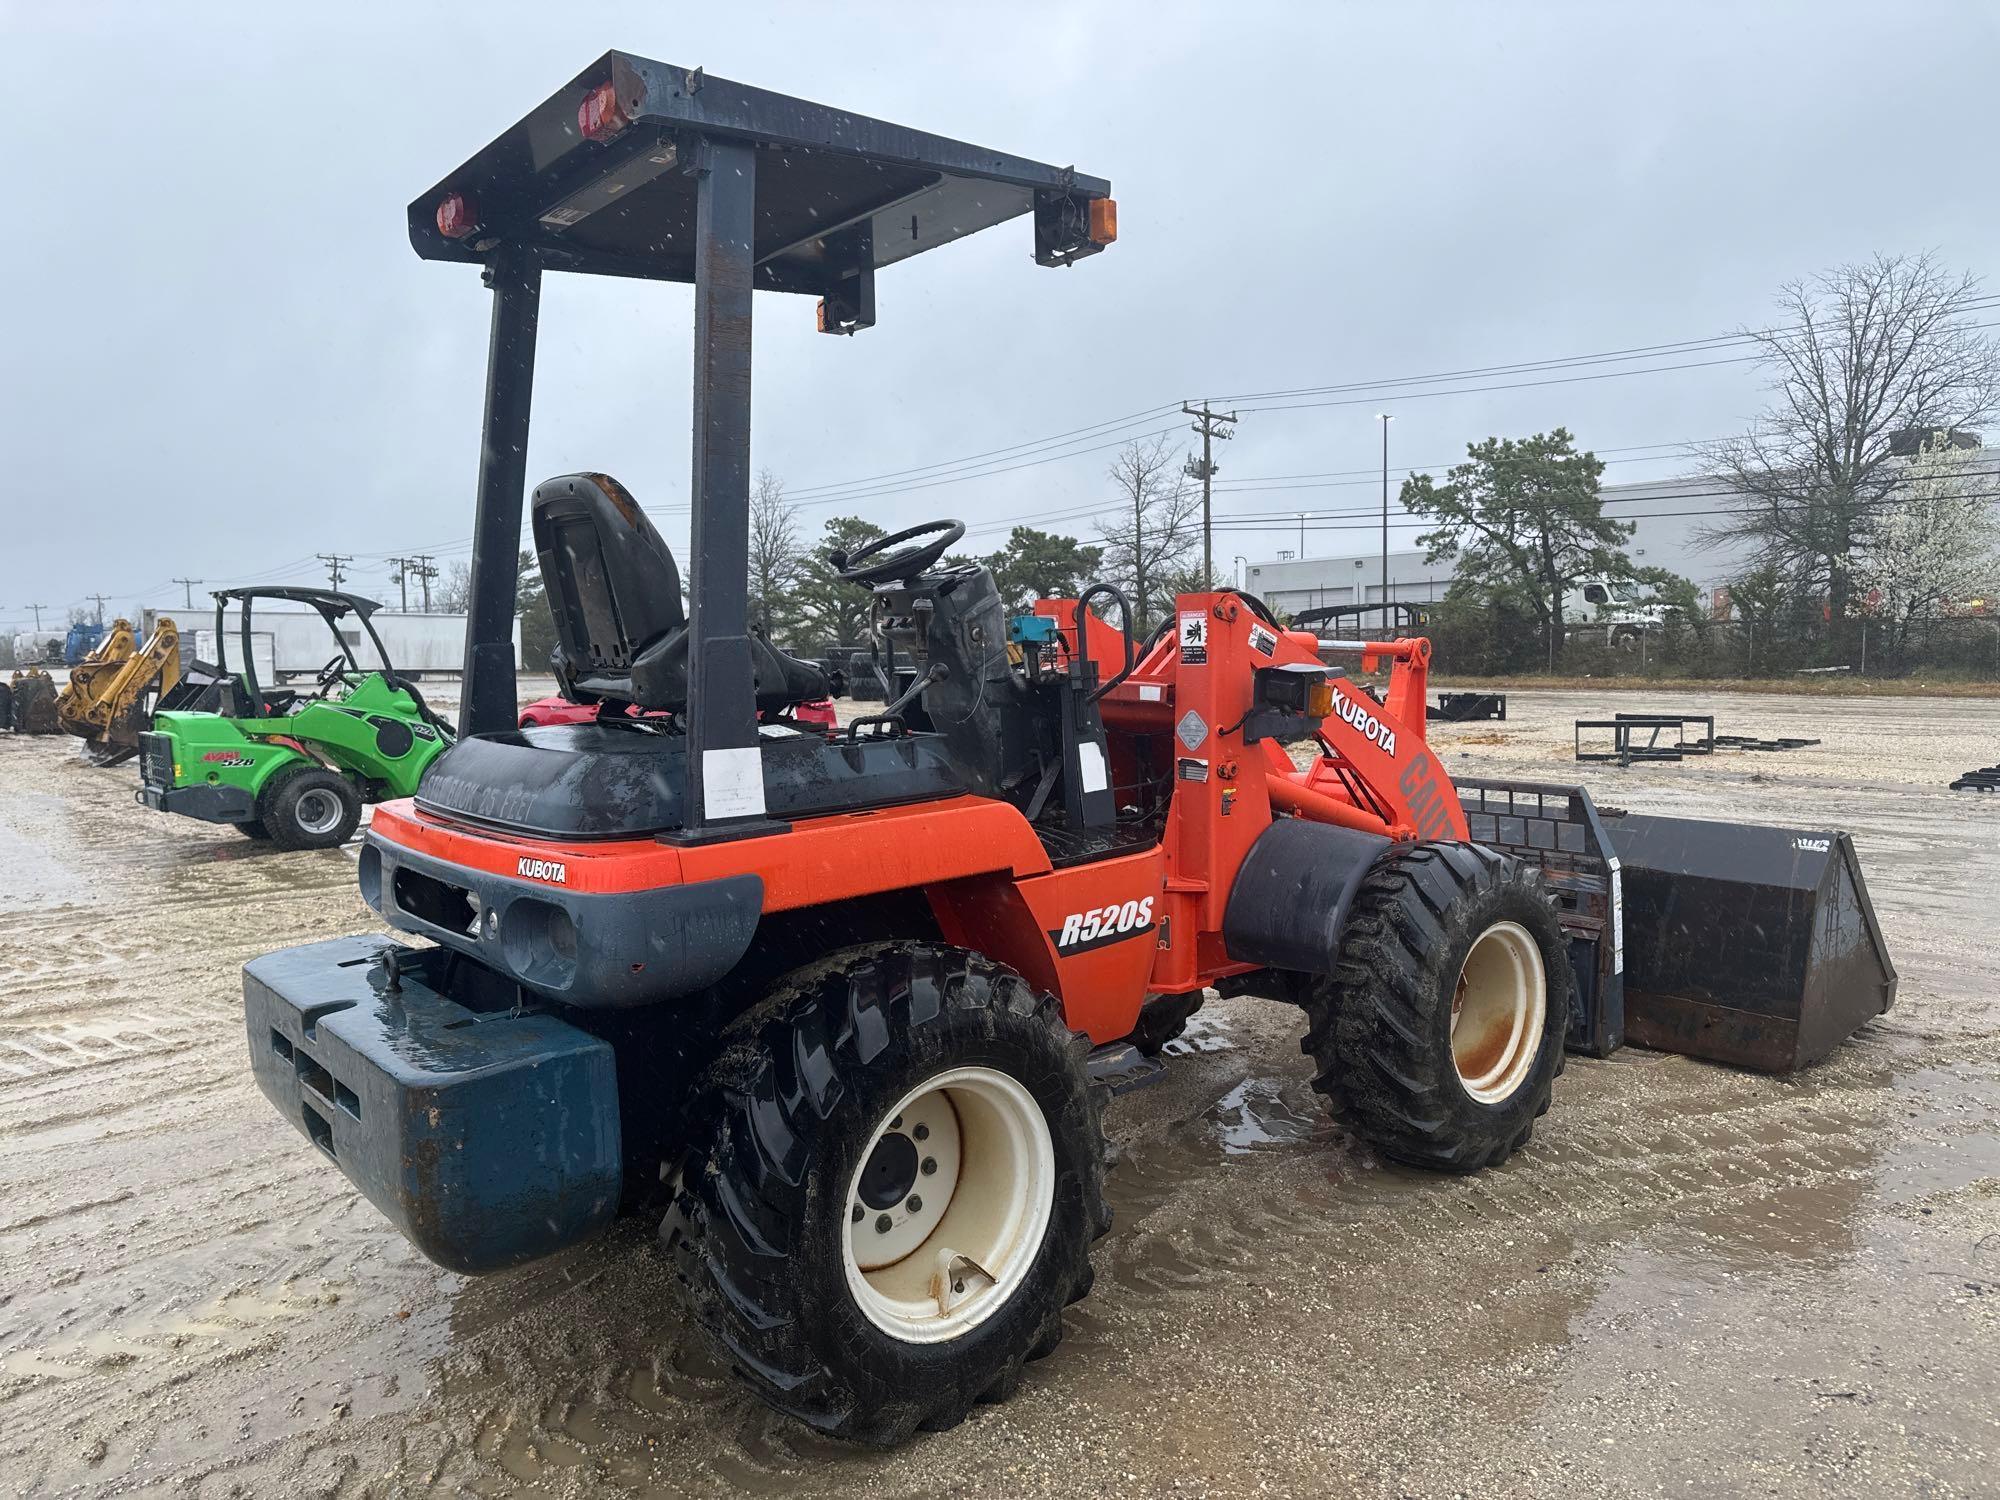 2010 KUBOTA R520S RUBBER TIRED LOADER SN:11076 powered by Kubota diesel engine, equipped with OROPS,